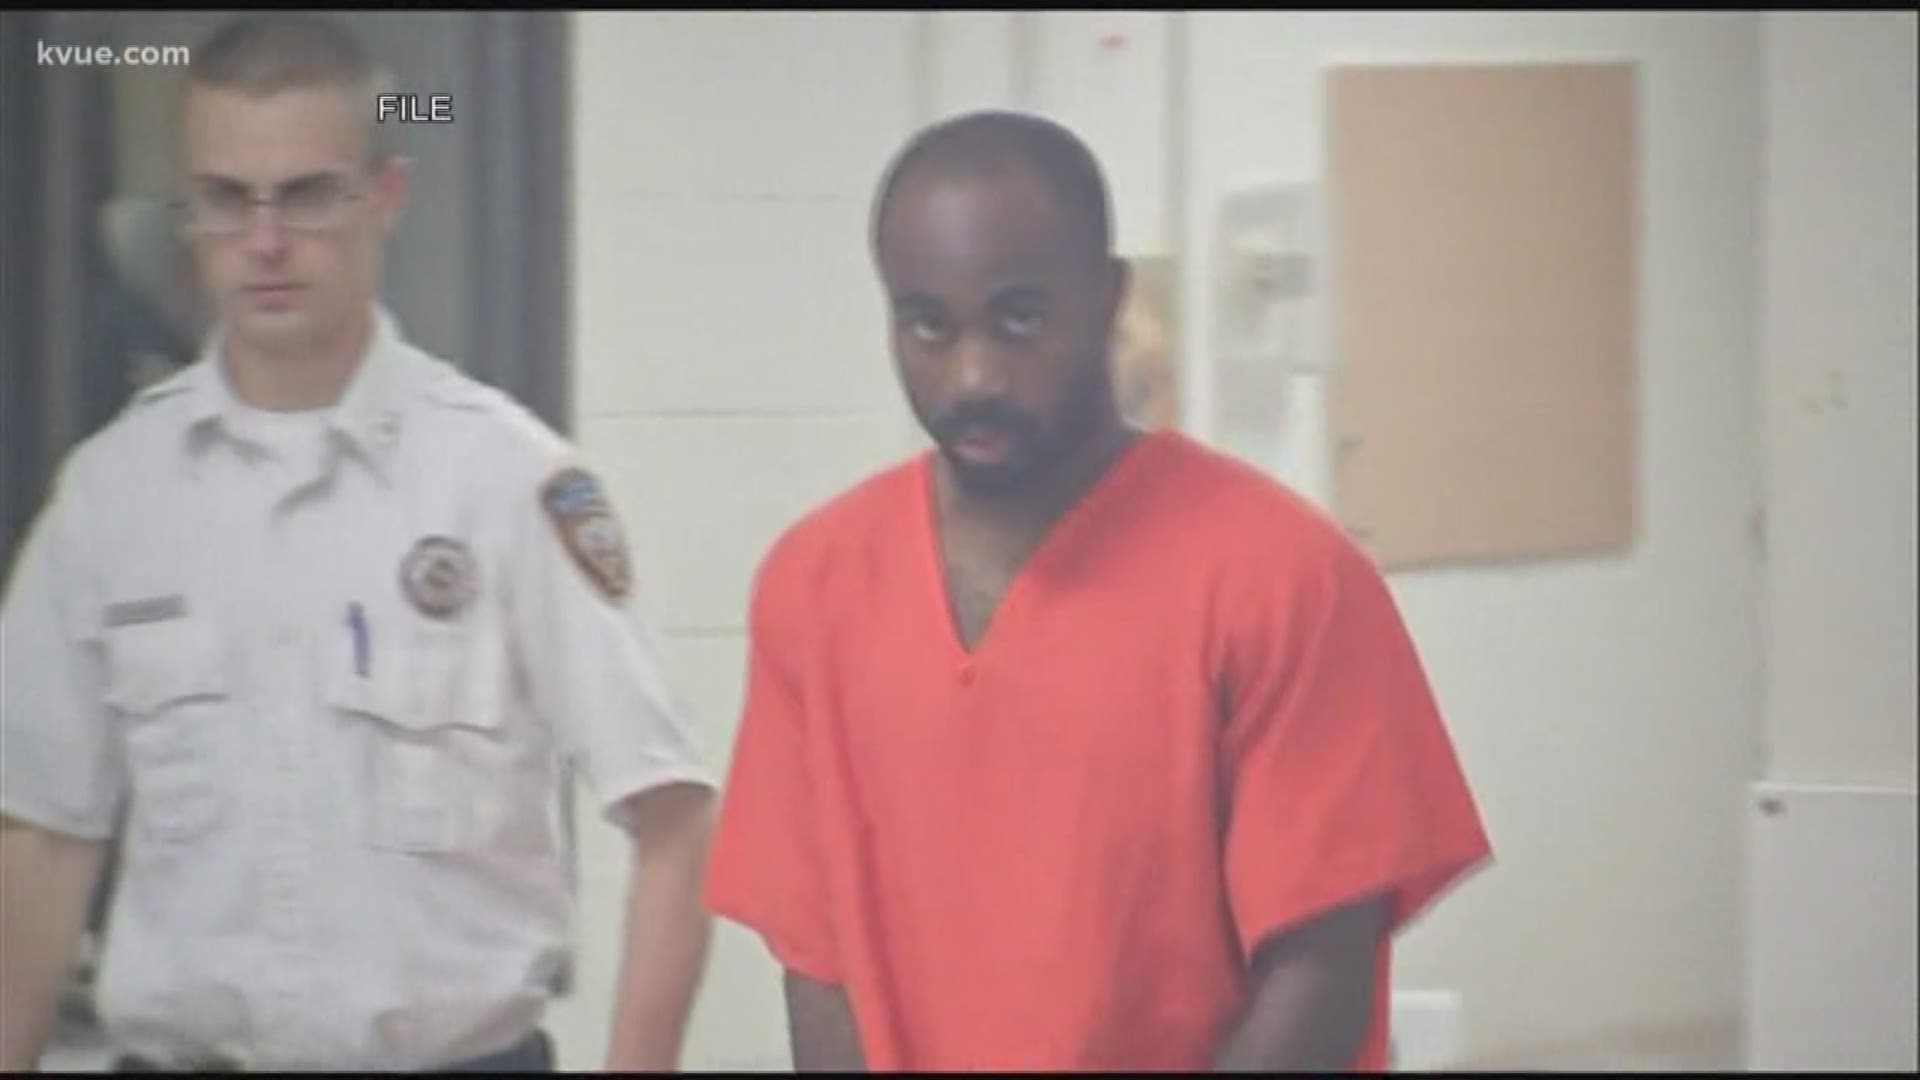 A federal jury today found the man accused of trying to assassinate her guilty-- on 17 criminal counts.